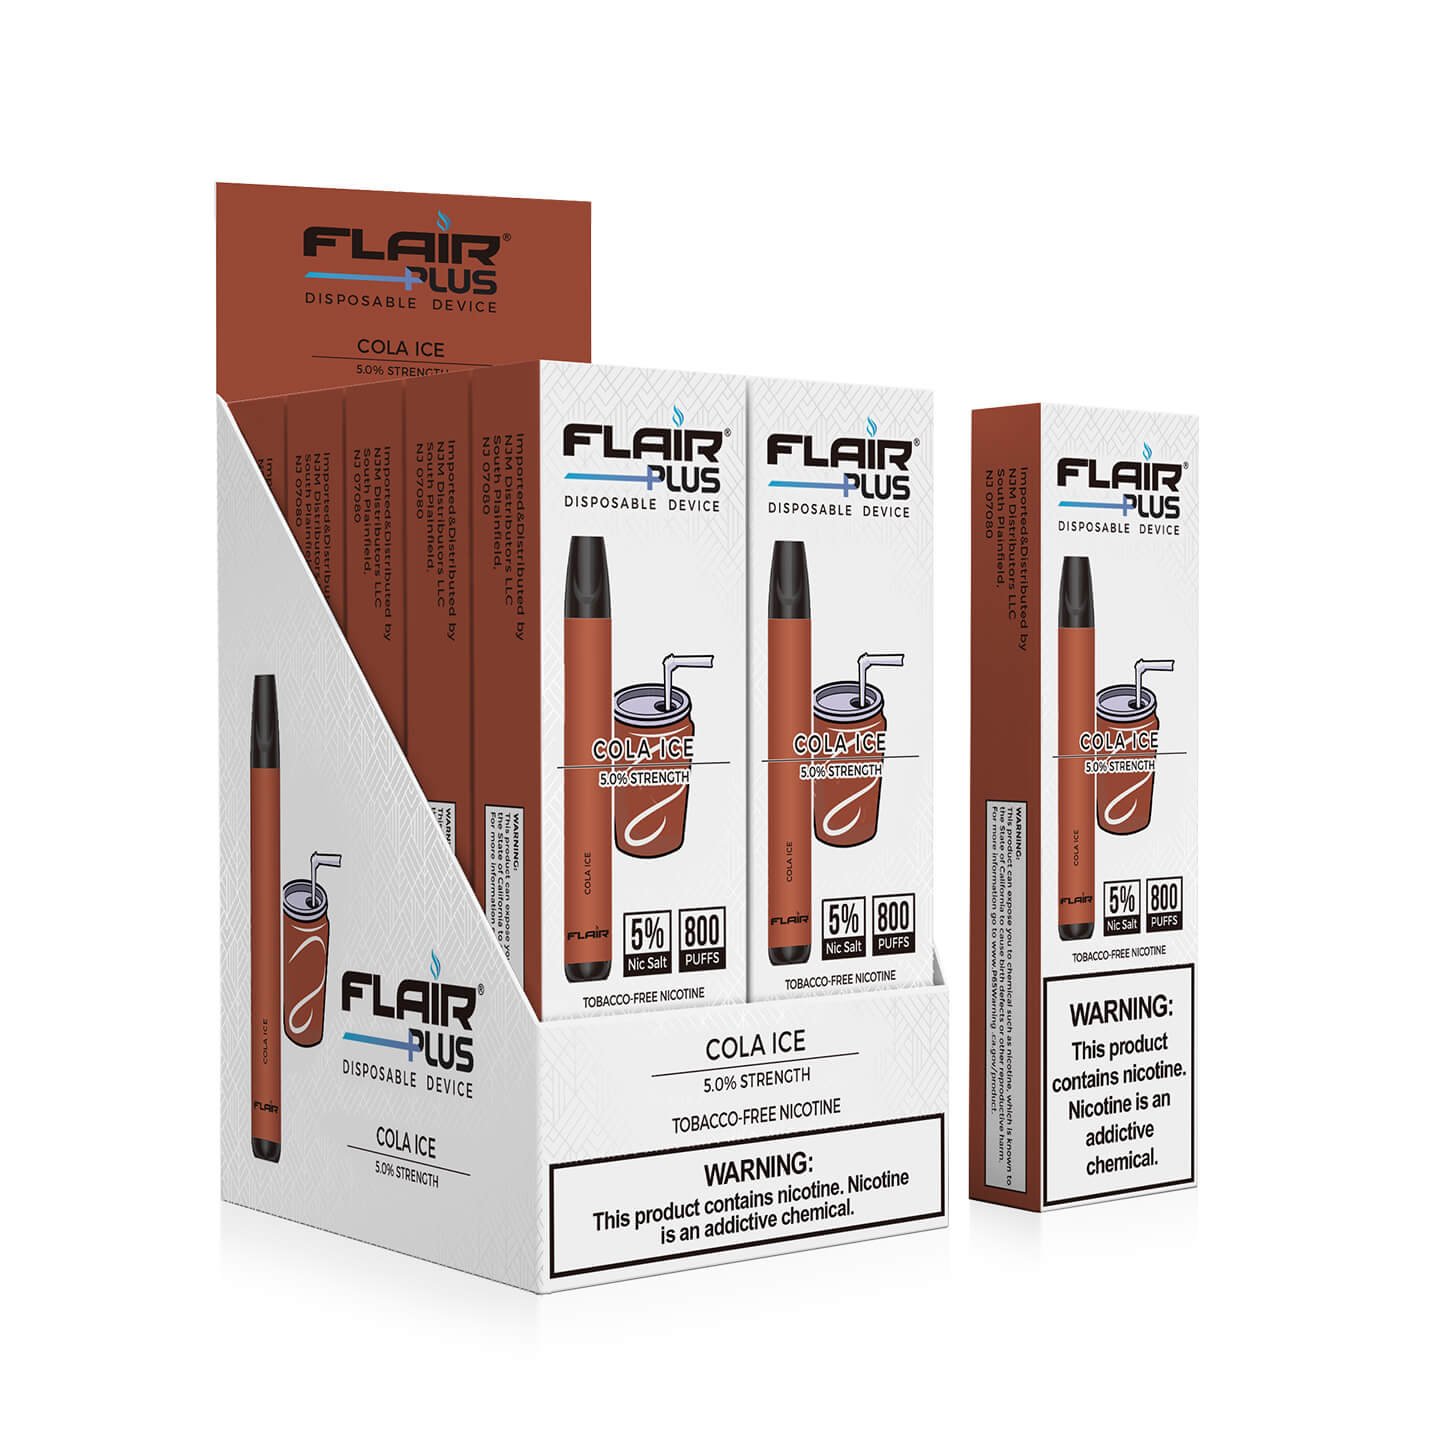 Flair Ultra Disposable Devices (Banana Ice - 2500 Puffs) - VapeShire